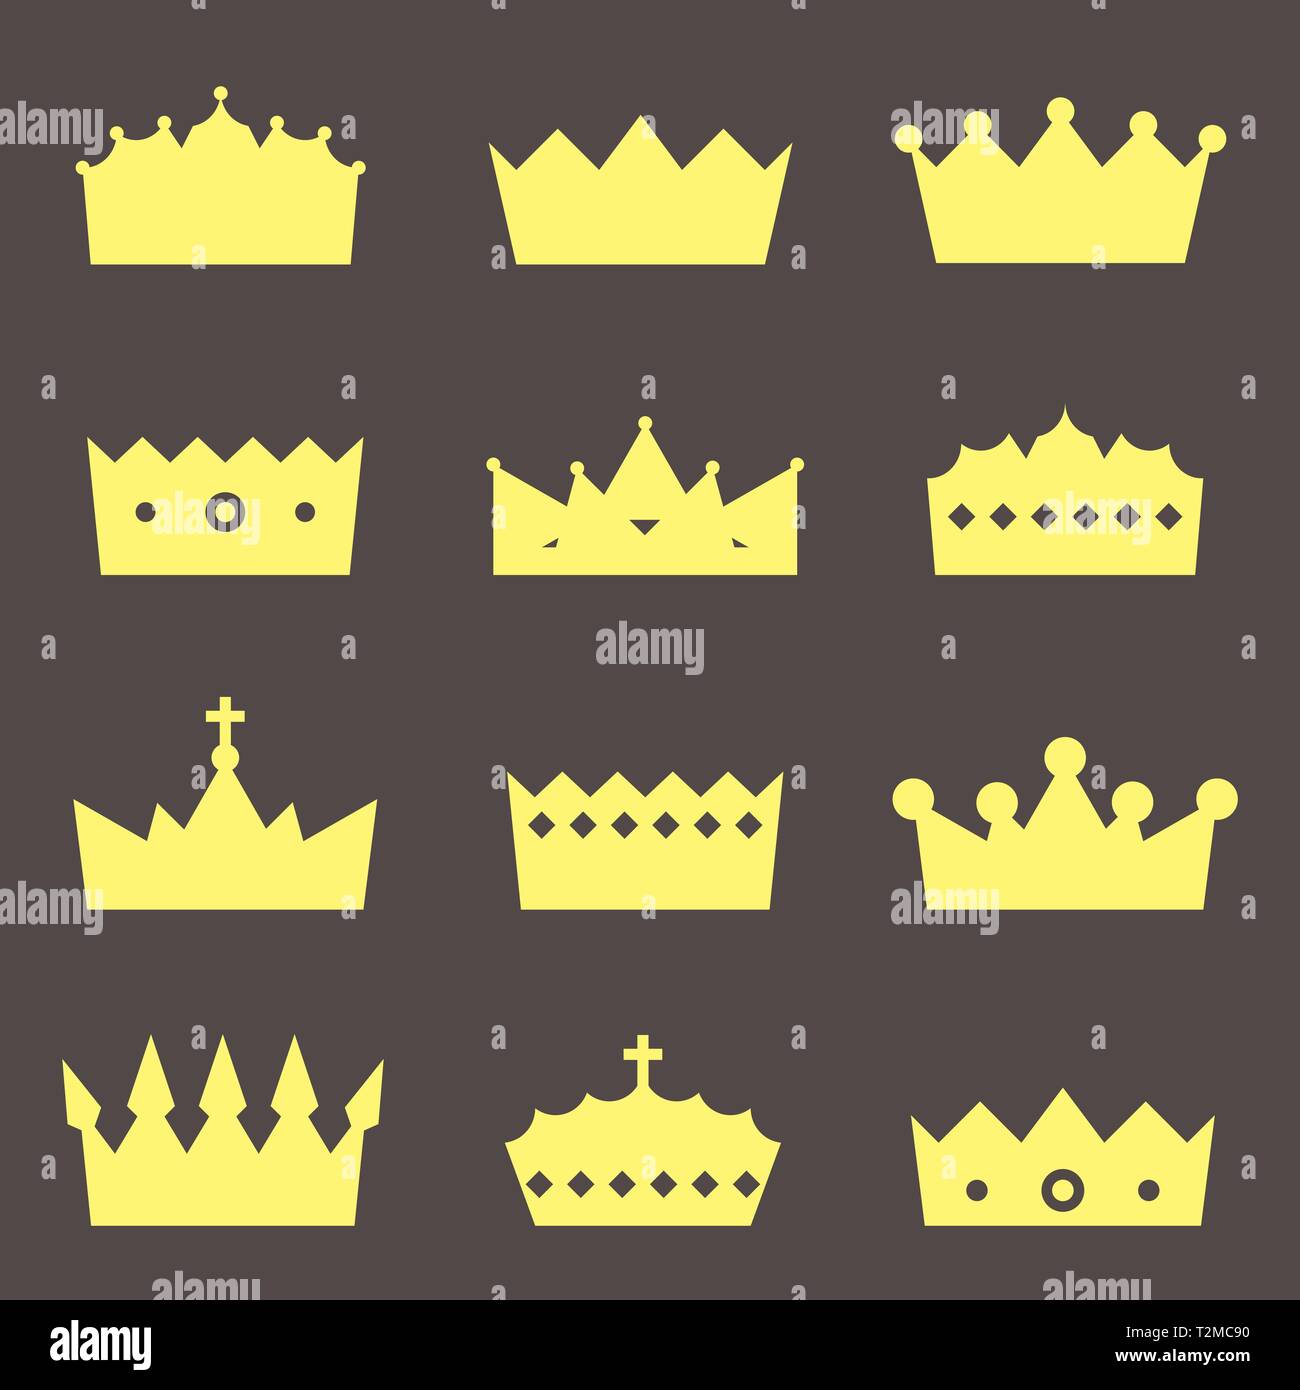 Crown icons collection - royal insignia vector illustration set Stock ...